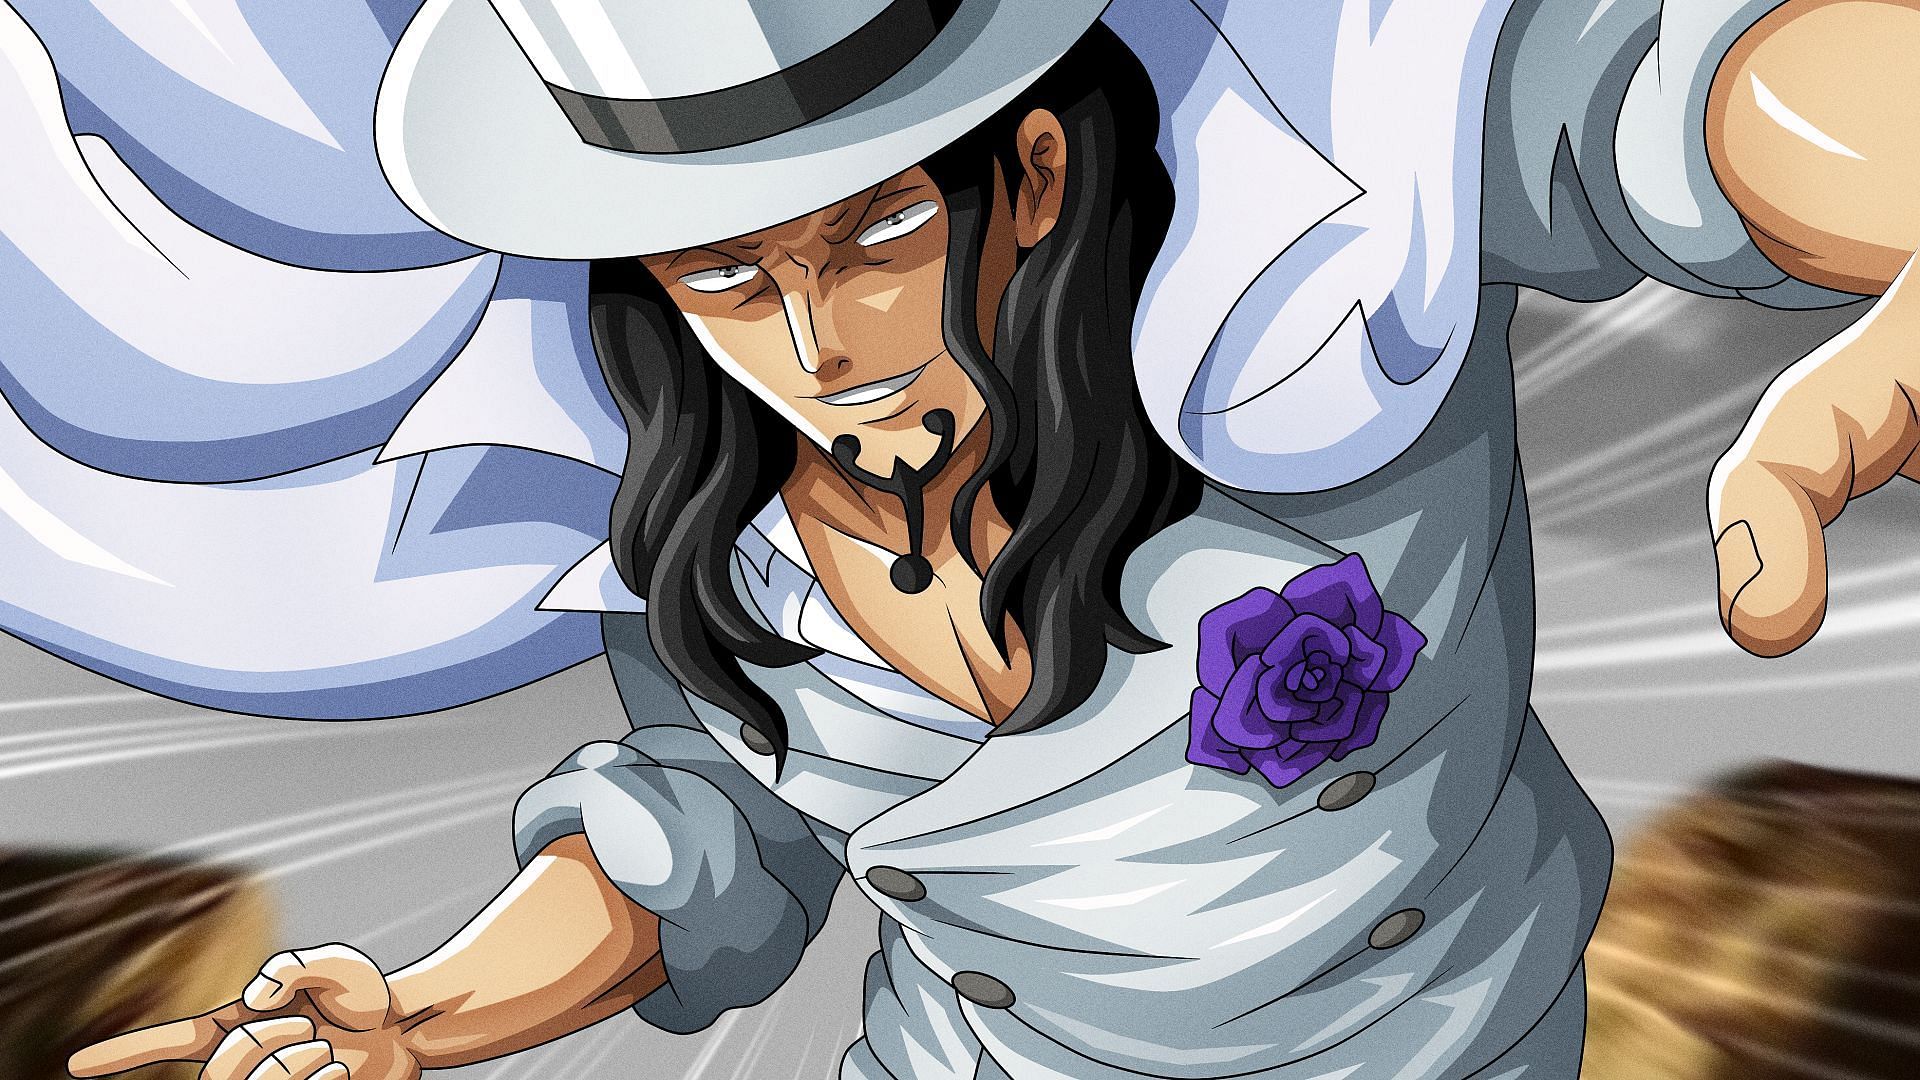 With powerful Armament Haki and a new Awakened Zoan form, Lucci is now a force to be reckoned with (Image via Eiichiro Oda/Shueisha, One Piece)